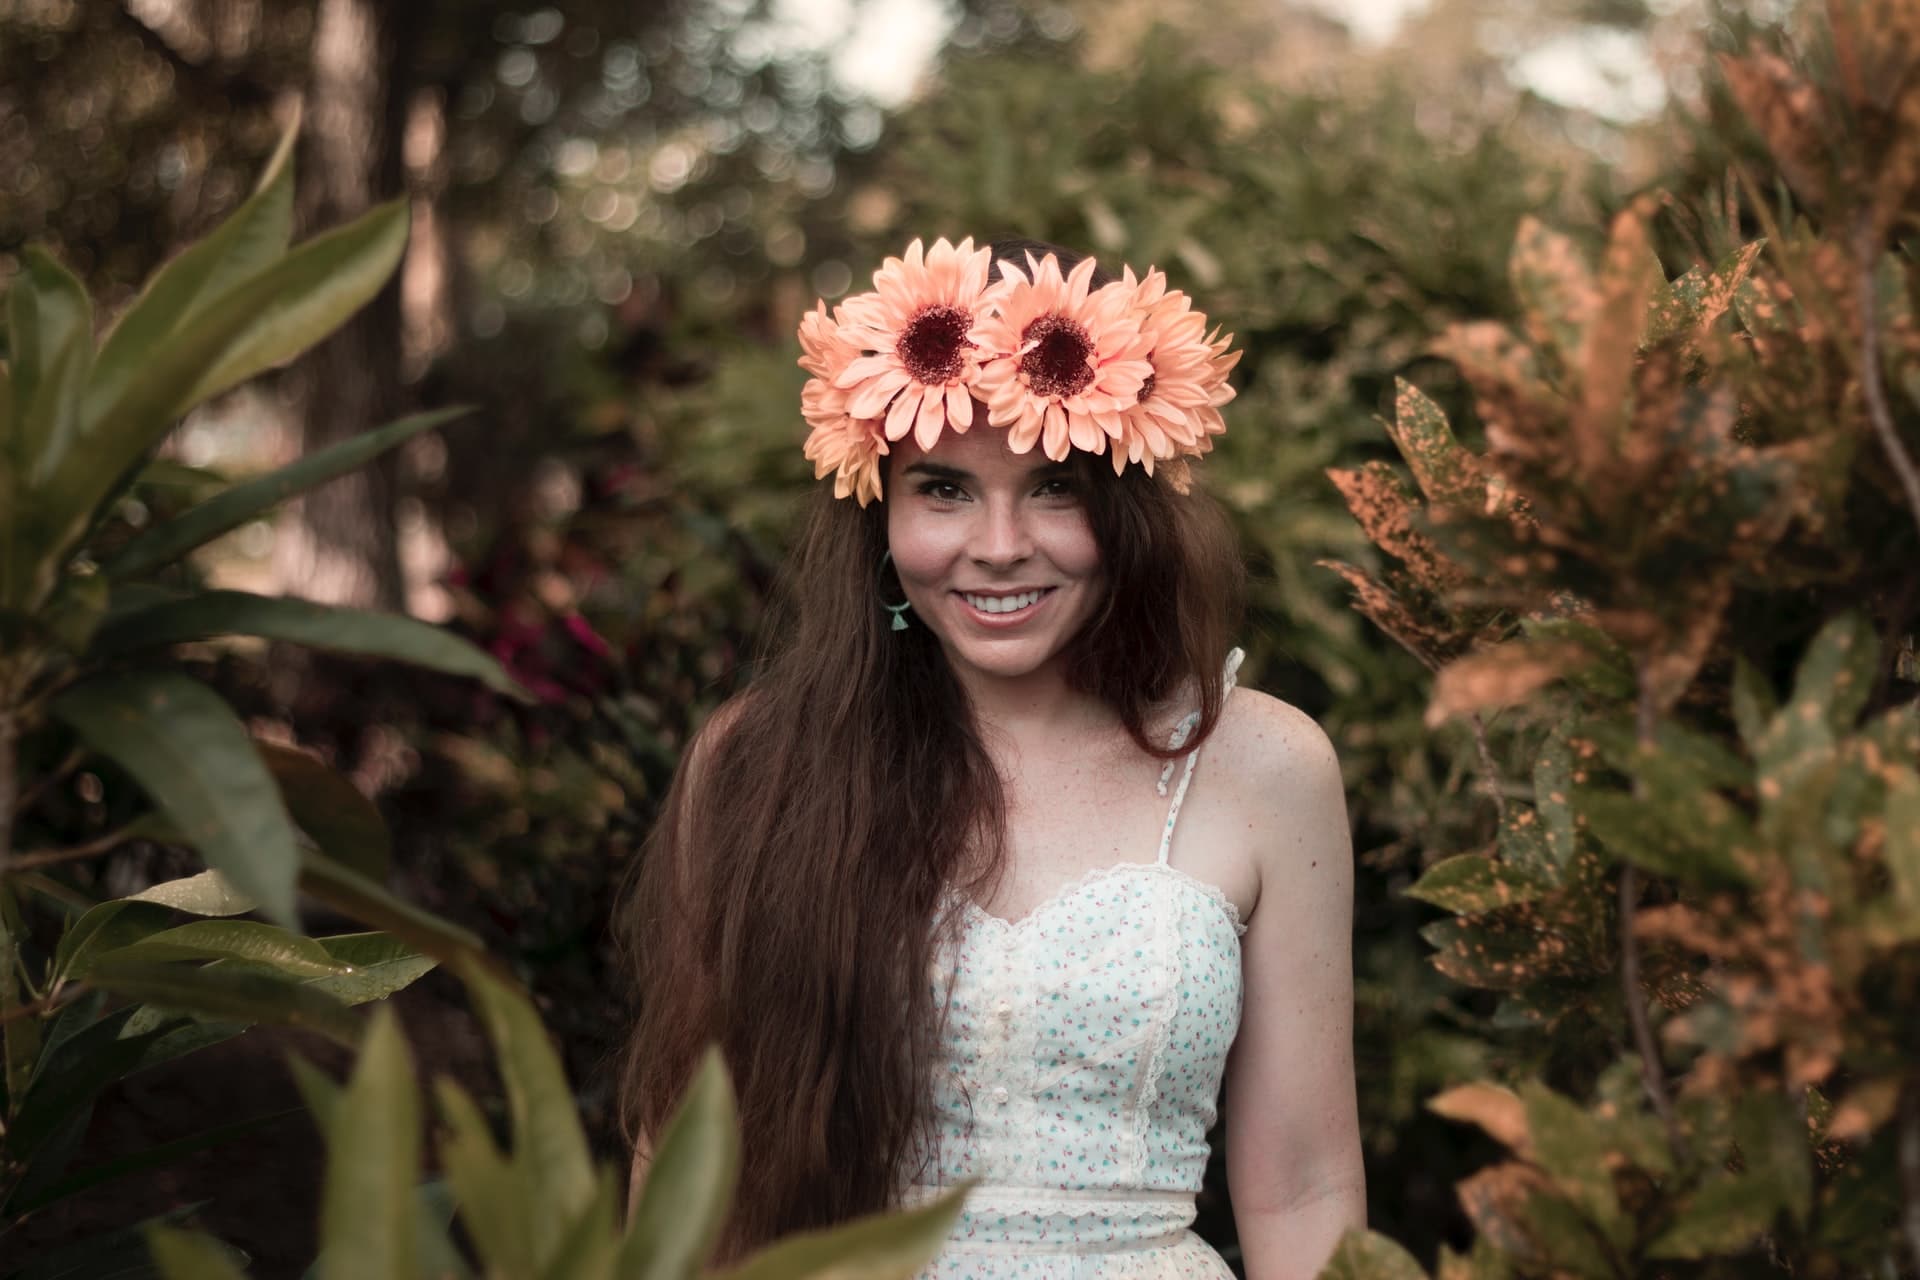 A smiling woman wearing a floral headpiece surrounded by lush greenery exudes a witchy aura.